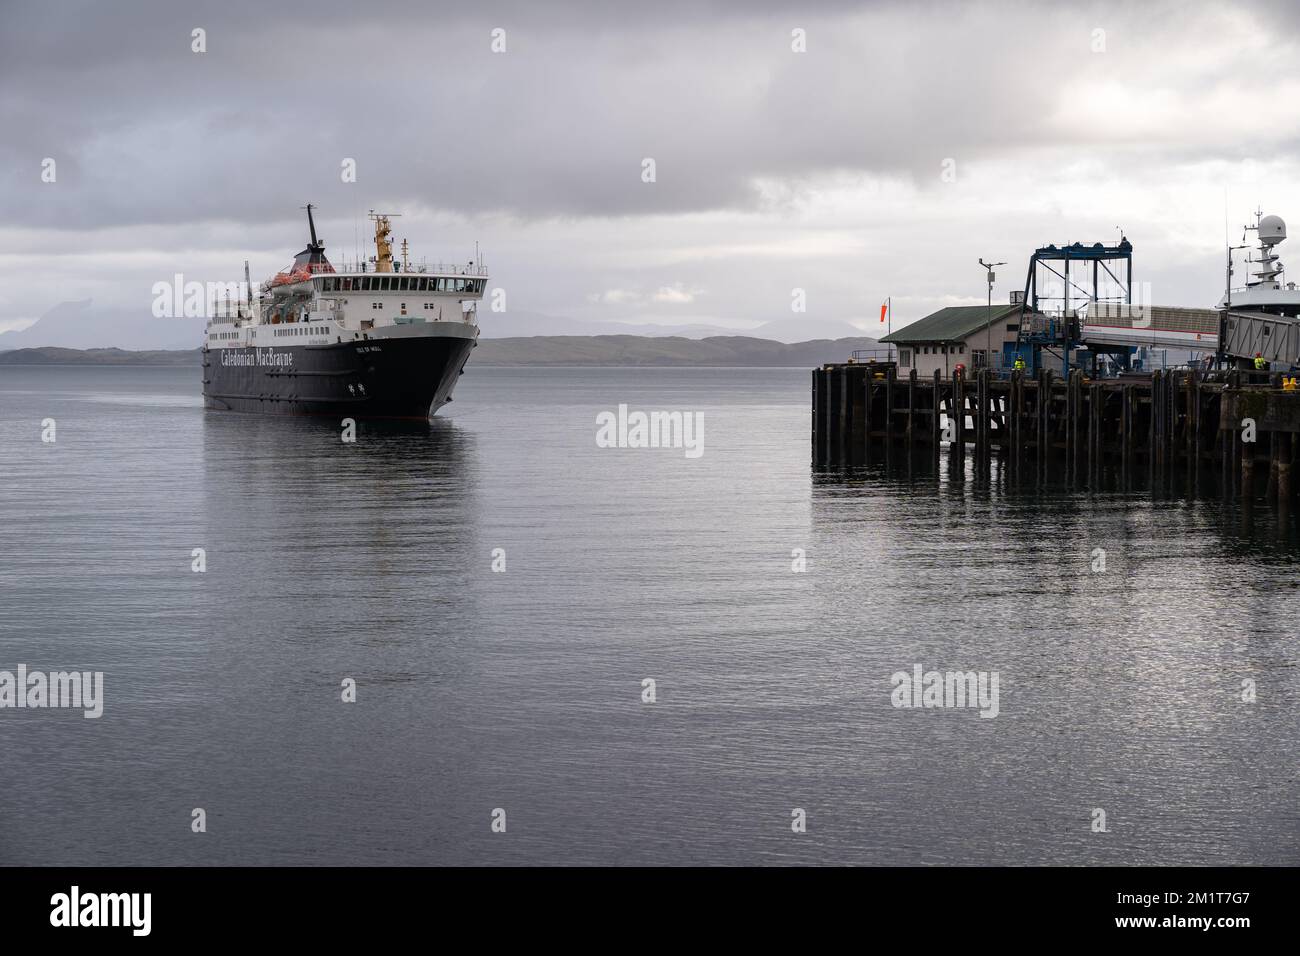 A Caledonian MacBrayne (Calmac) ferry, the MV Isle of Mull, coming in to port at Craignure on the Isle of Mull, Scotland Stock Photo